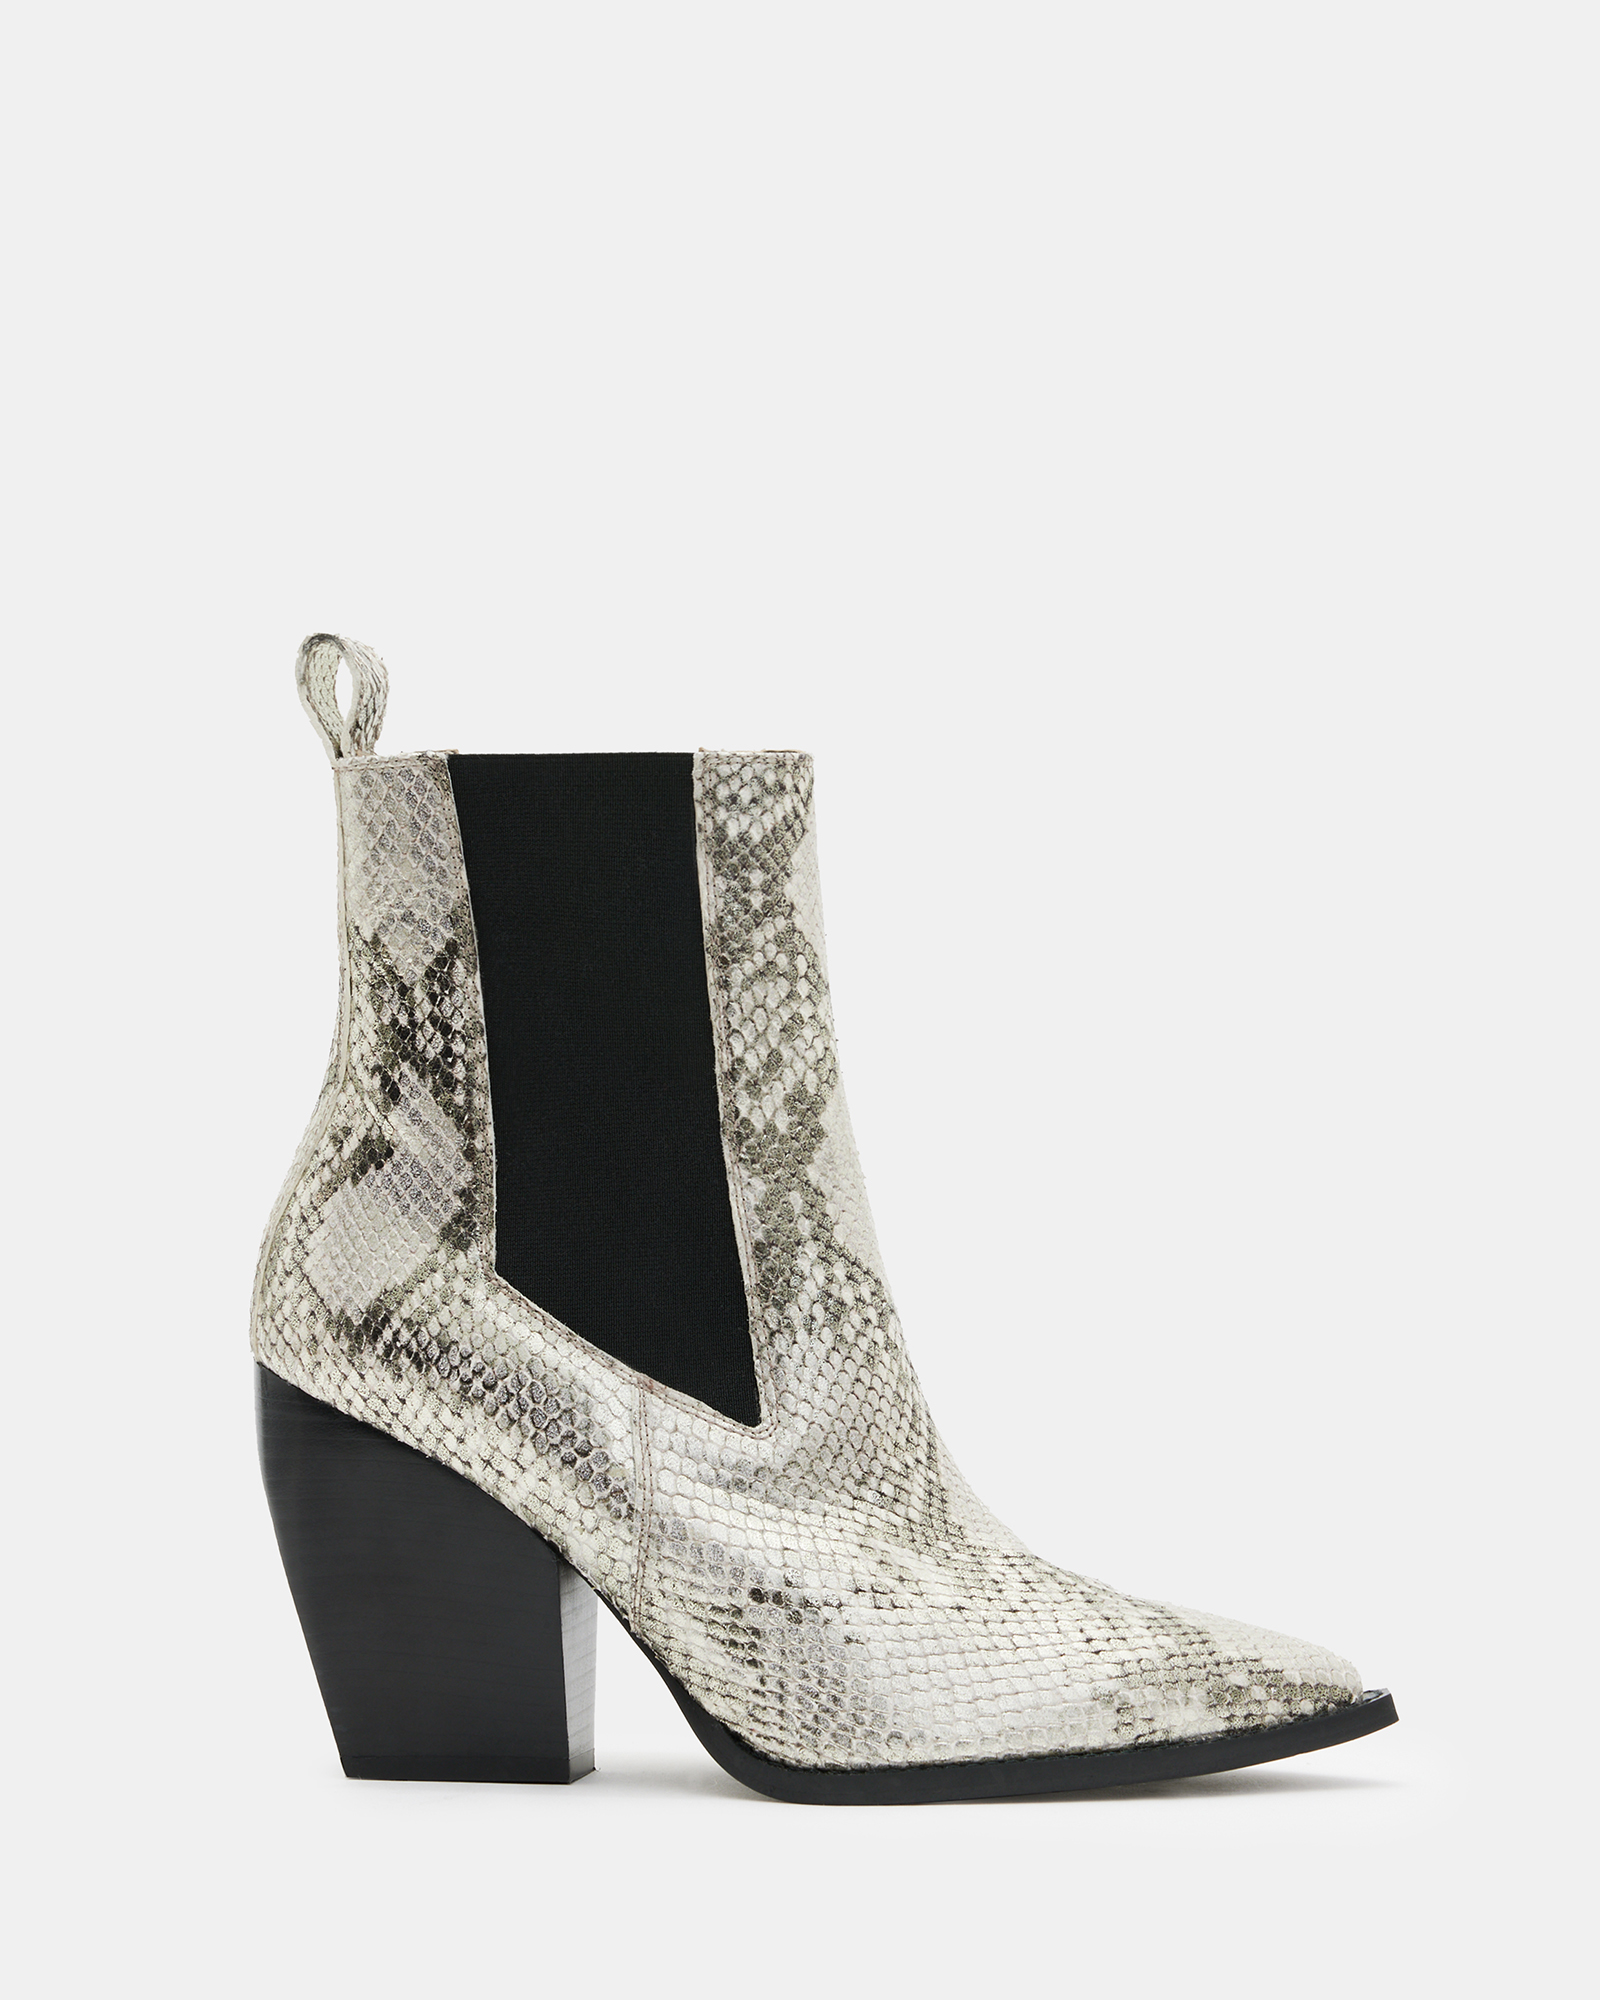 Allsaints Ria Pointed Snake Leather Boots In Metallic Gold